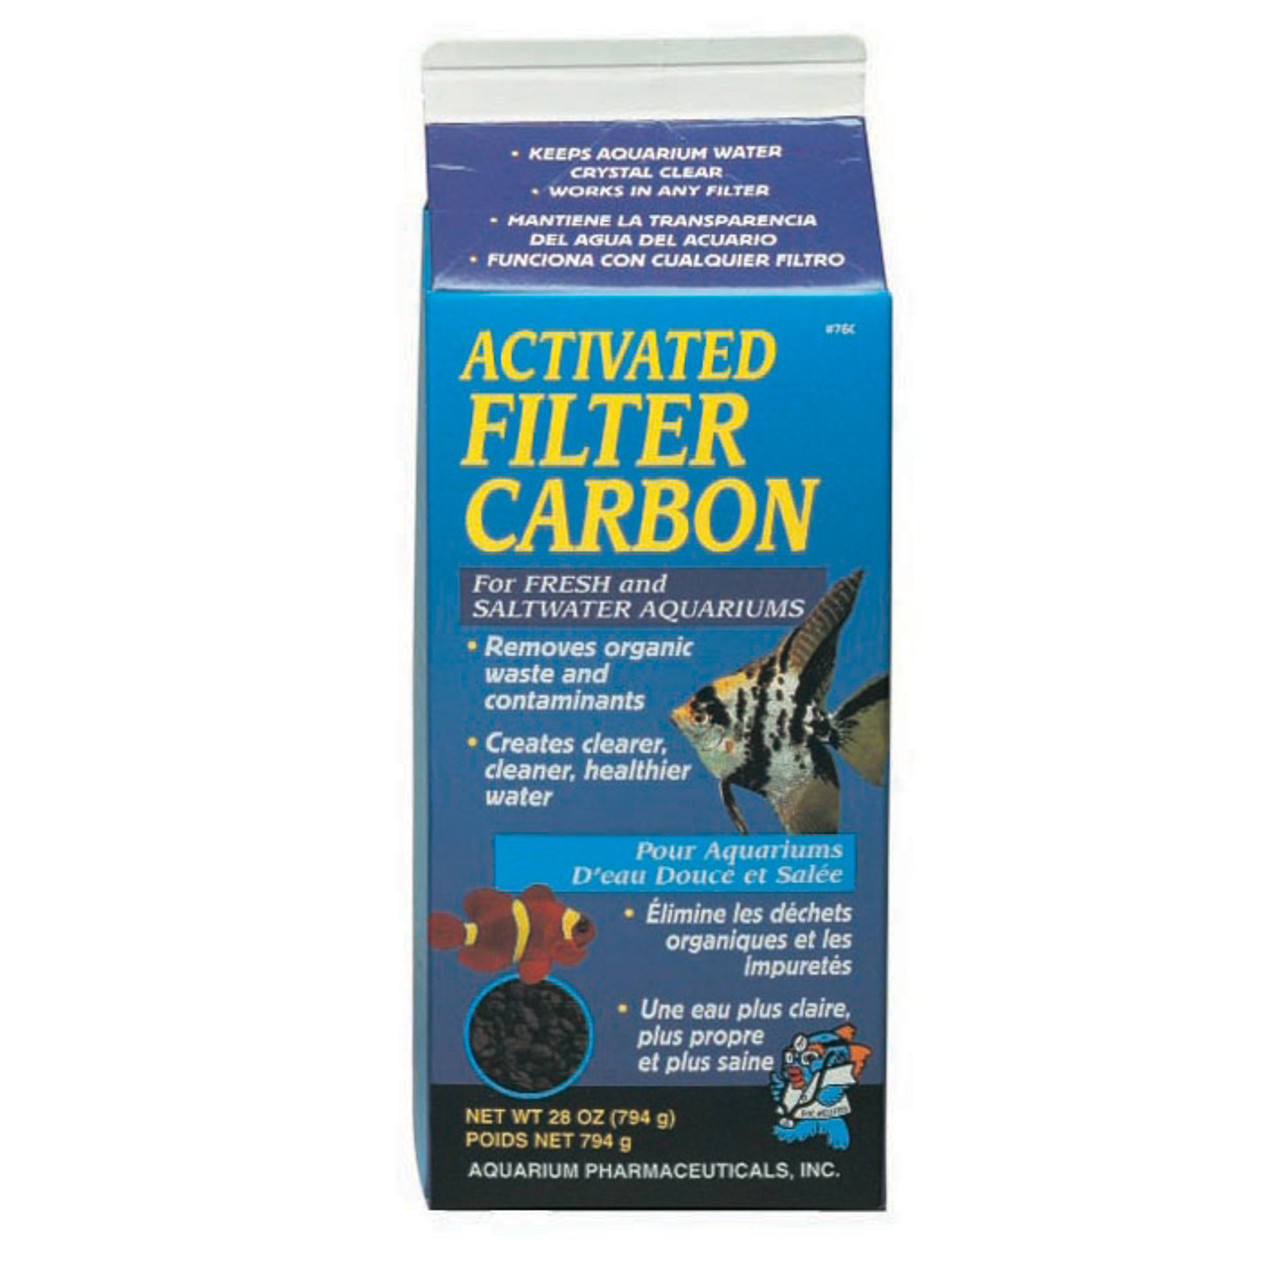 Super Activated Filter Carbon